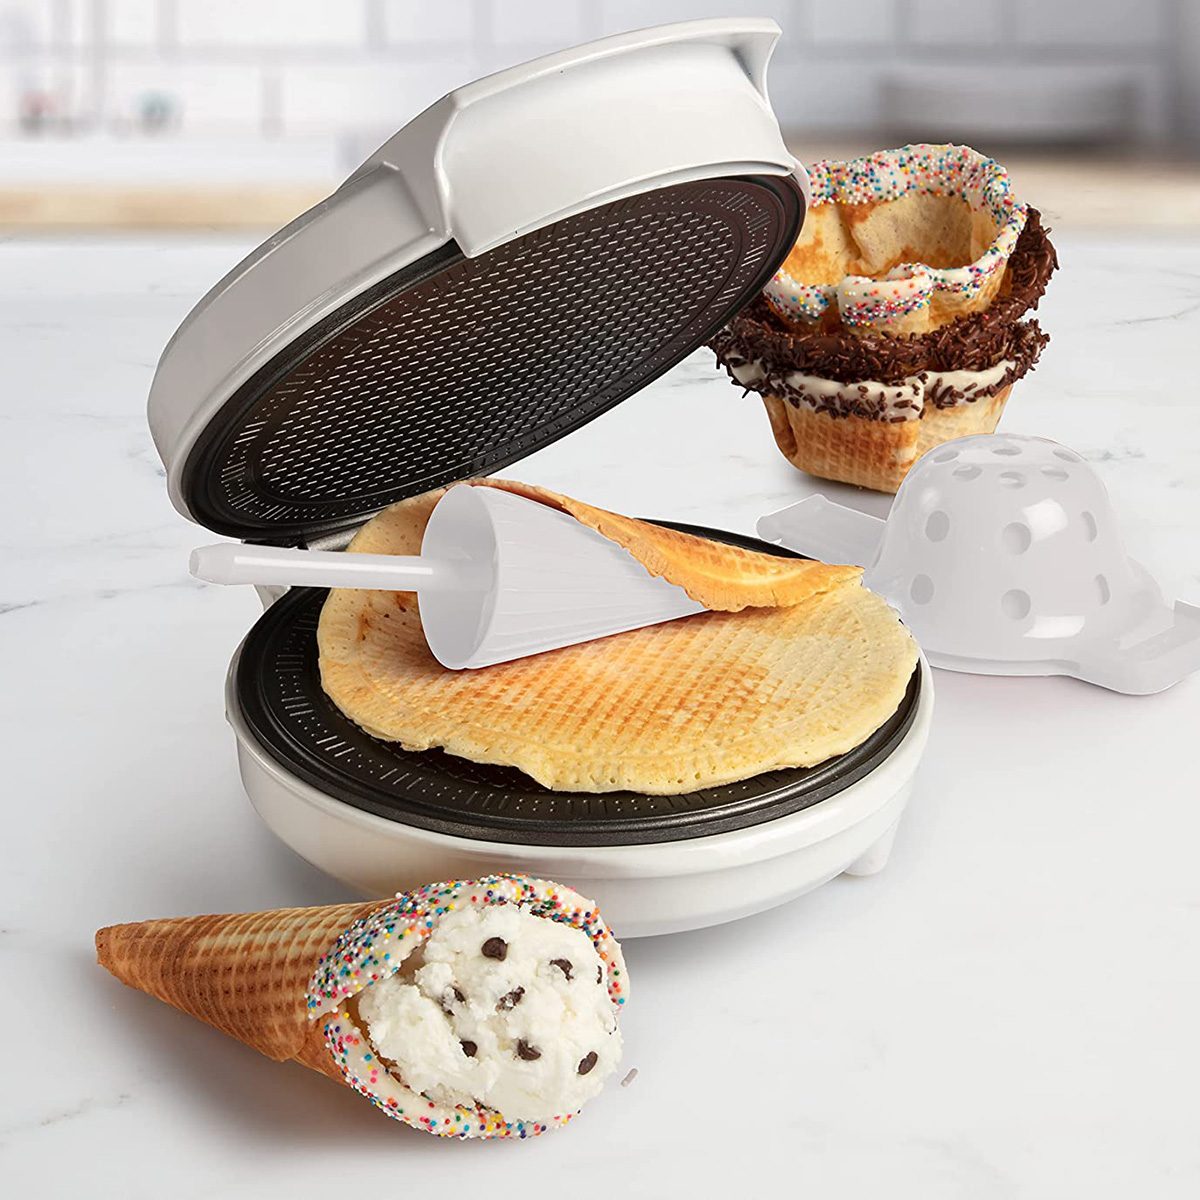 Waffle Bowl Maker, Just what I need to take my ice cream sundae party to  the next level!!  (affiliate), By cookies and cups